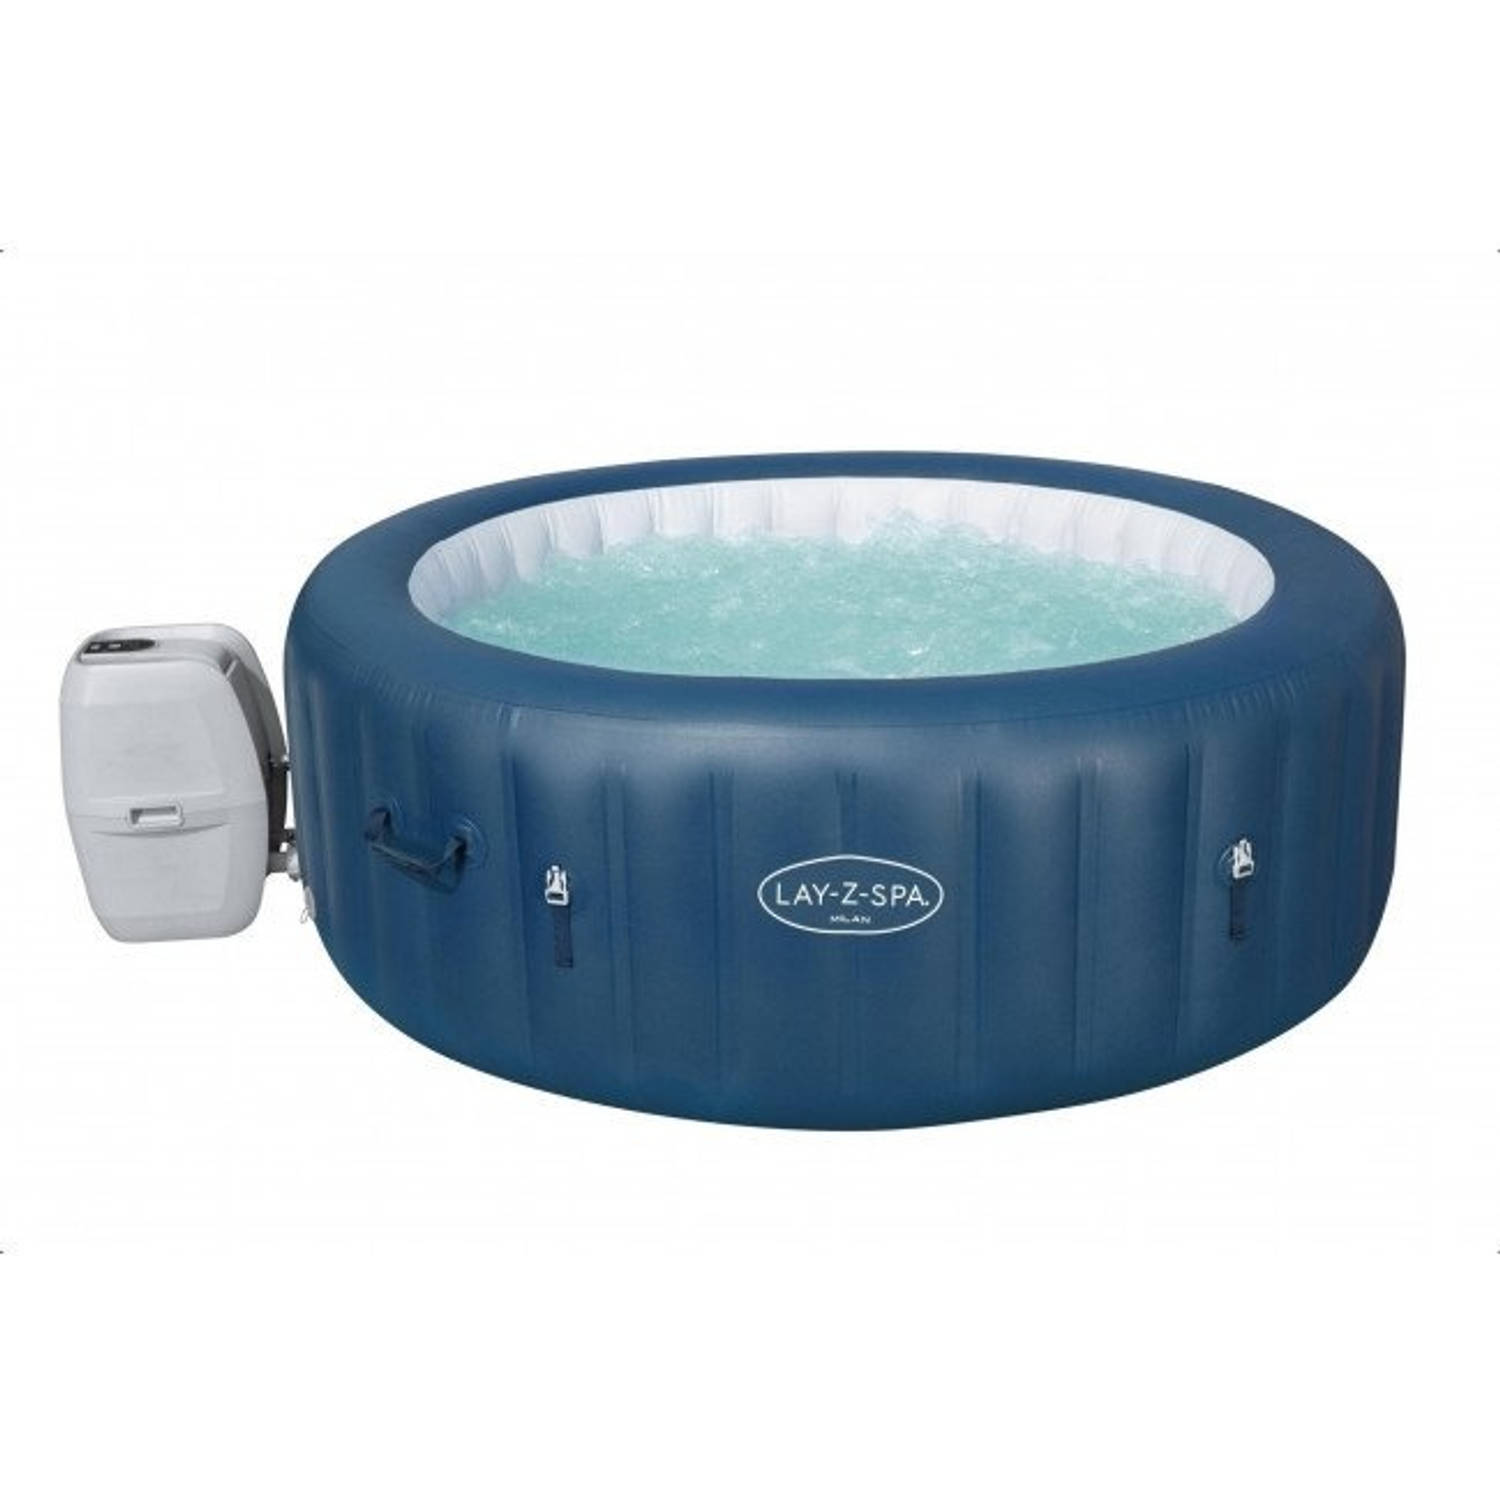 Lay-z-spa Milan Plus Max 6 Pers 140 Airjets Jacuzzi Bubbelbad- Whirlpool Copy Copy